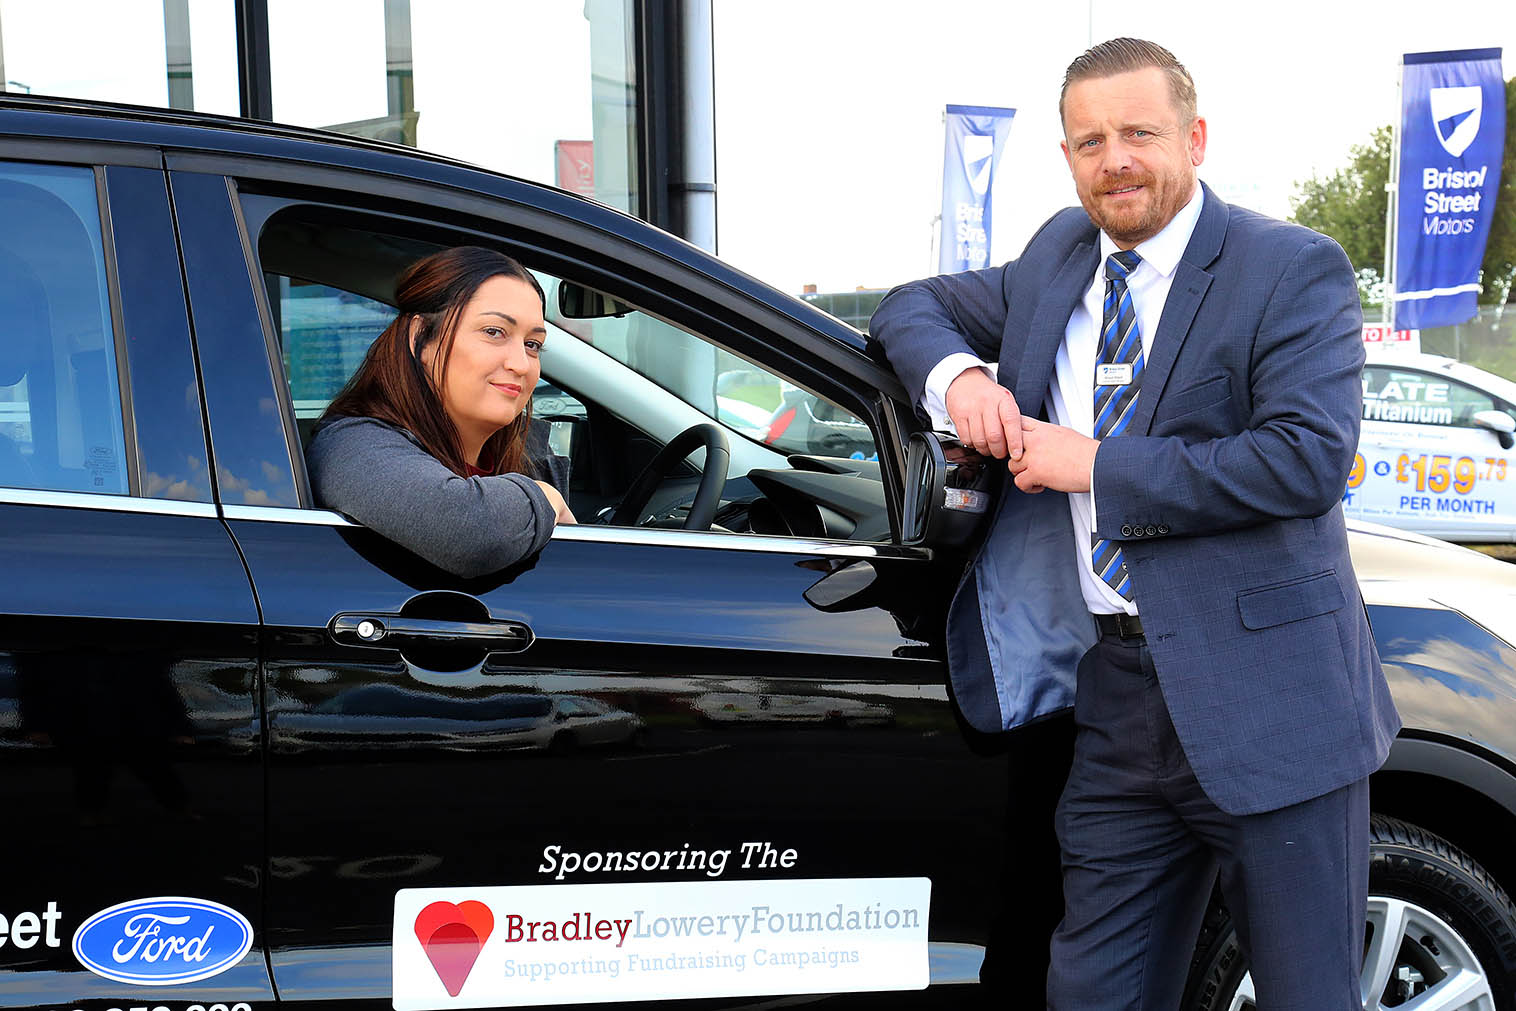 Hartlepool Ford helps the Bradley Lowery Foundation